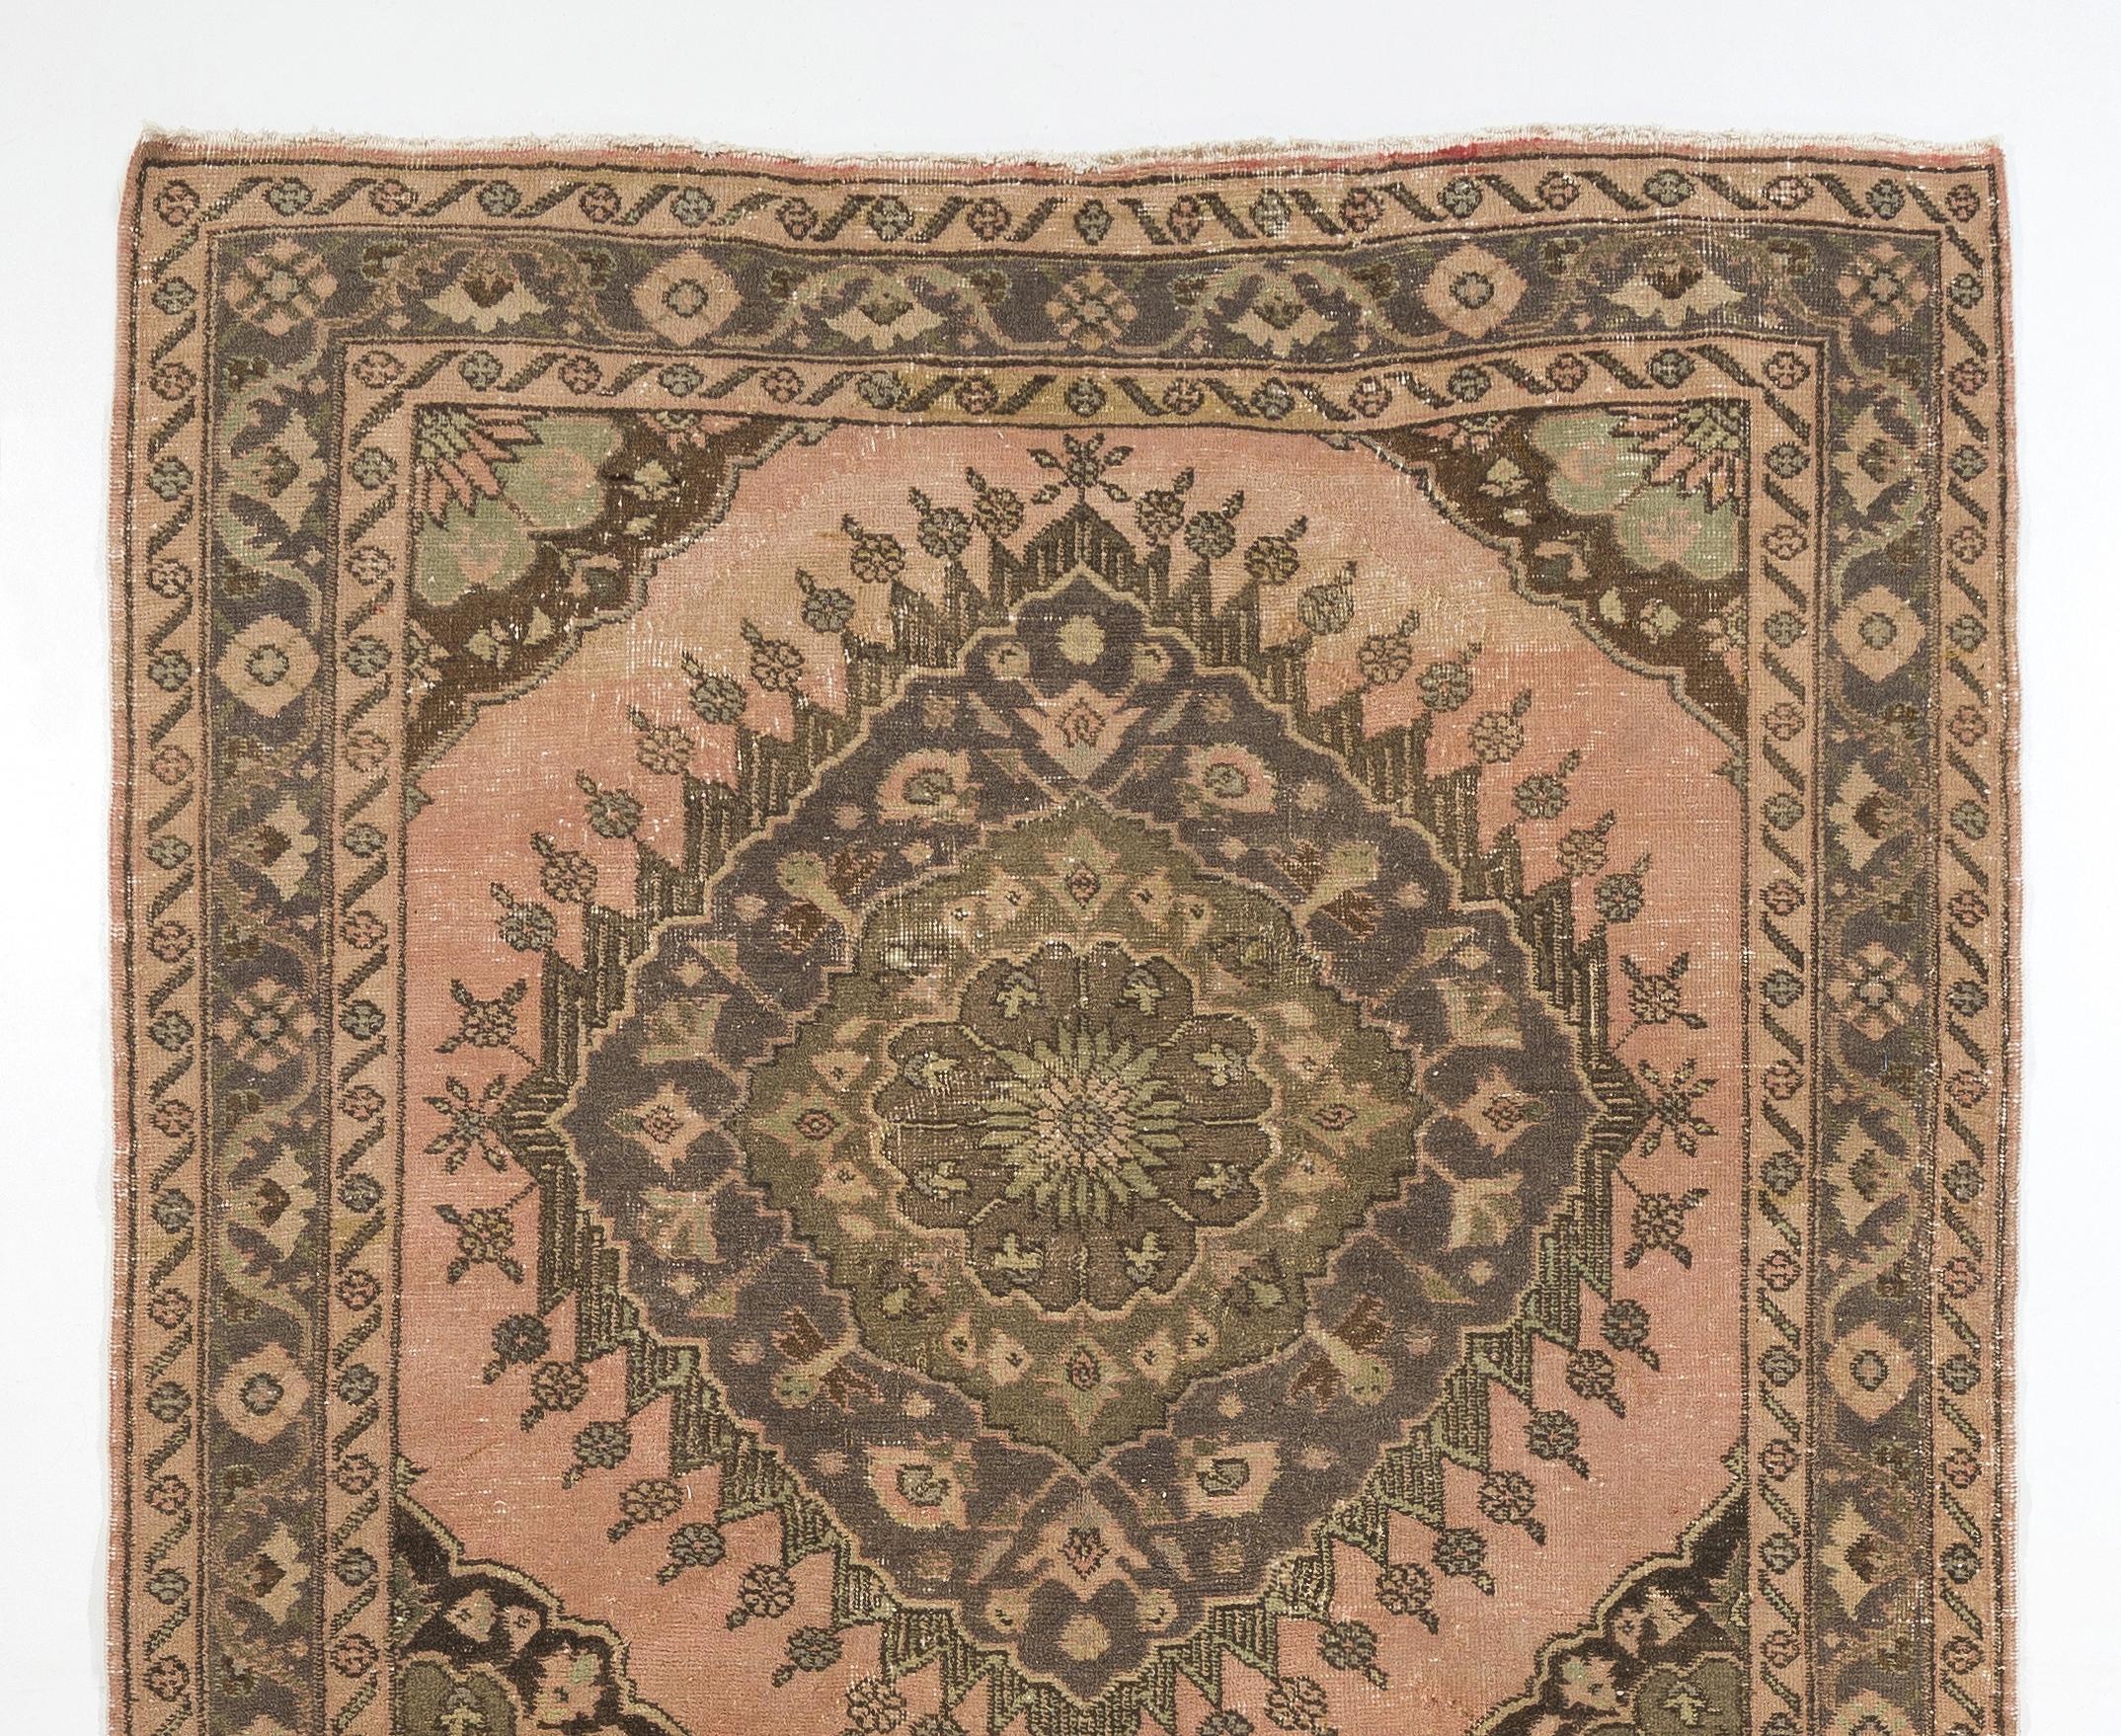 A vintage Turkish runner rug. It was hand-knotted in the 1950s with even medium wool pile on wool foundation and features a multiple medallion design. It is in very good condition, professionally-washed, sturdy and suitable for areas with high foot